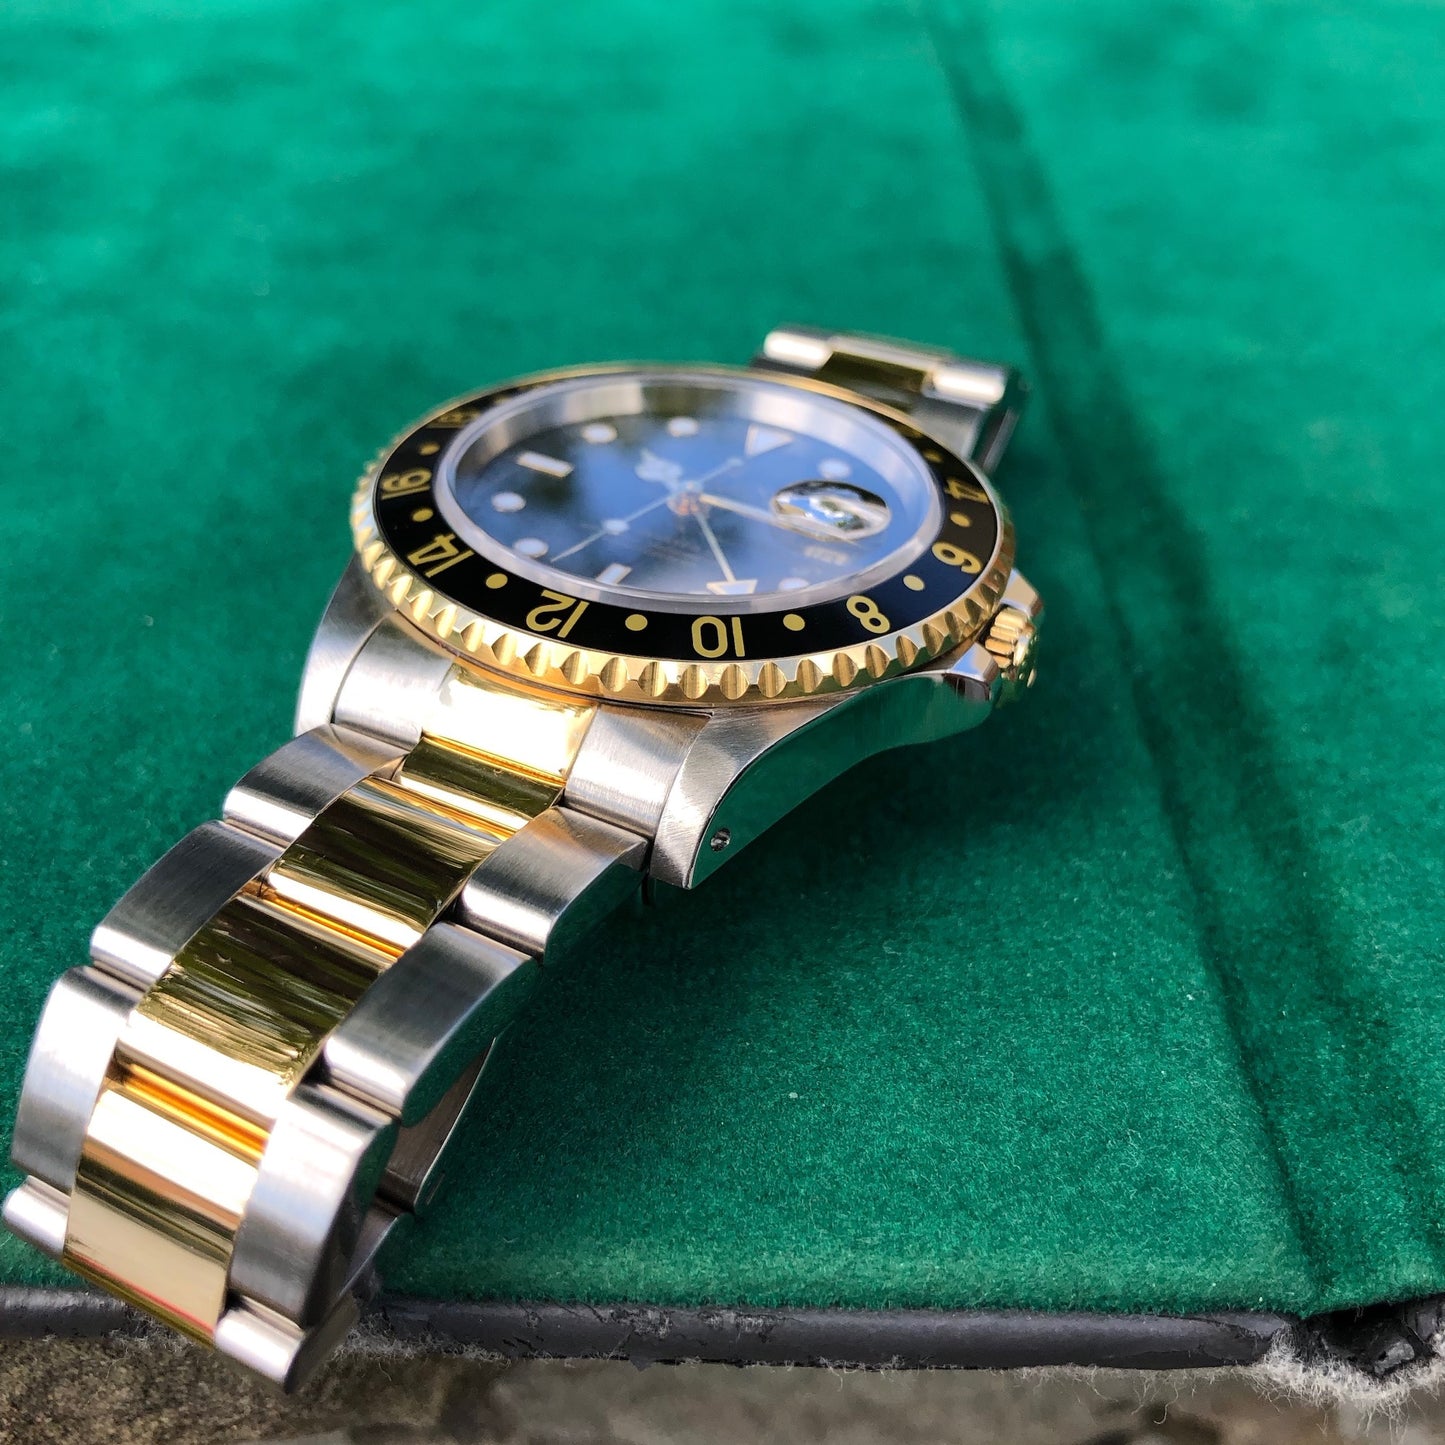 Rolex GMT MASTER II 16713 Steel Gold Oyster Two Tone Black Wristwatch Box Papers Circa 1997 - Hashtag Watch Company